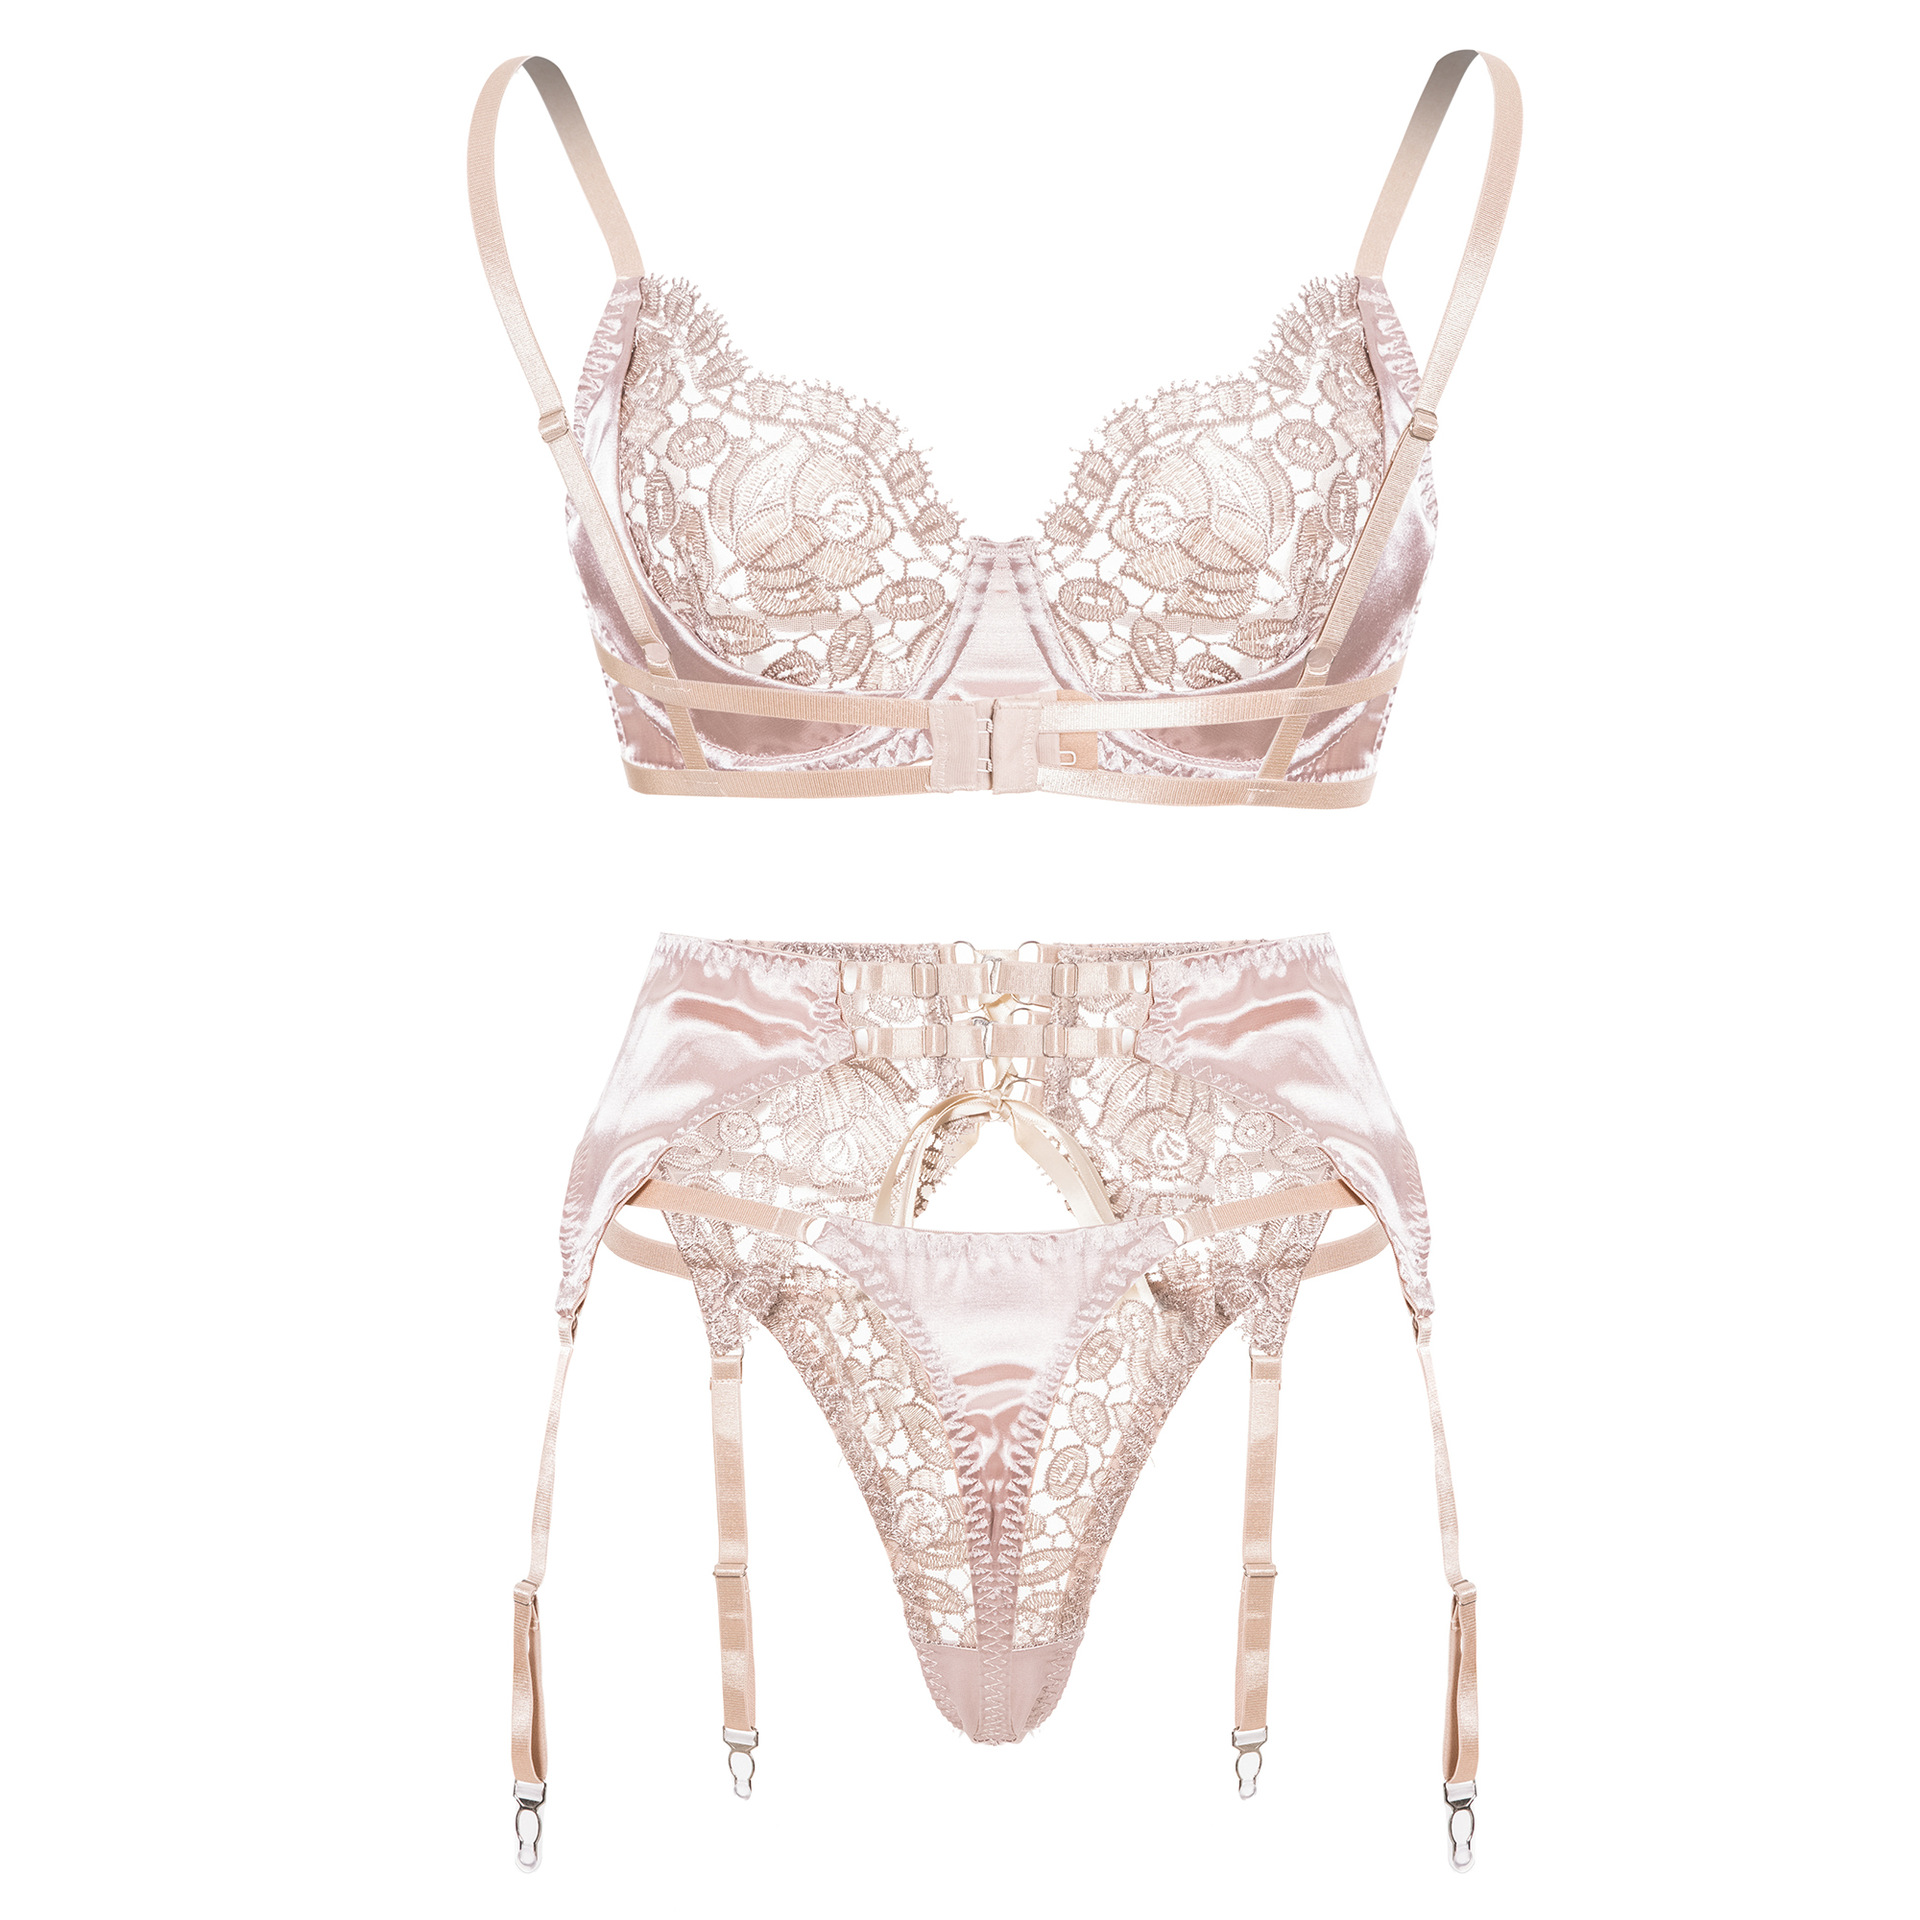 Chic Elegance in a Vintage-inspired Floral Embroidery Lingerie Set